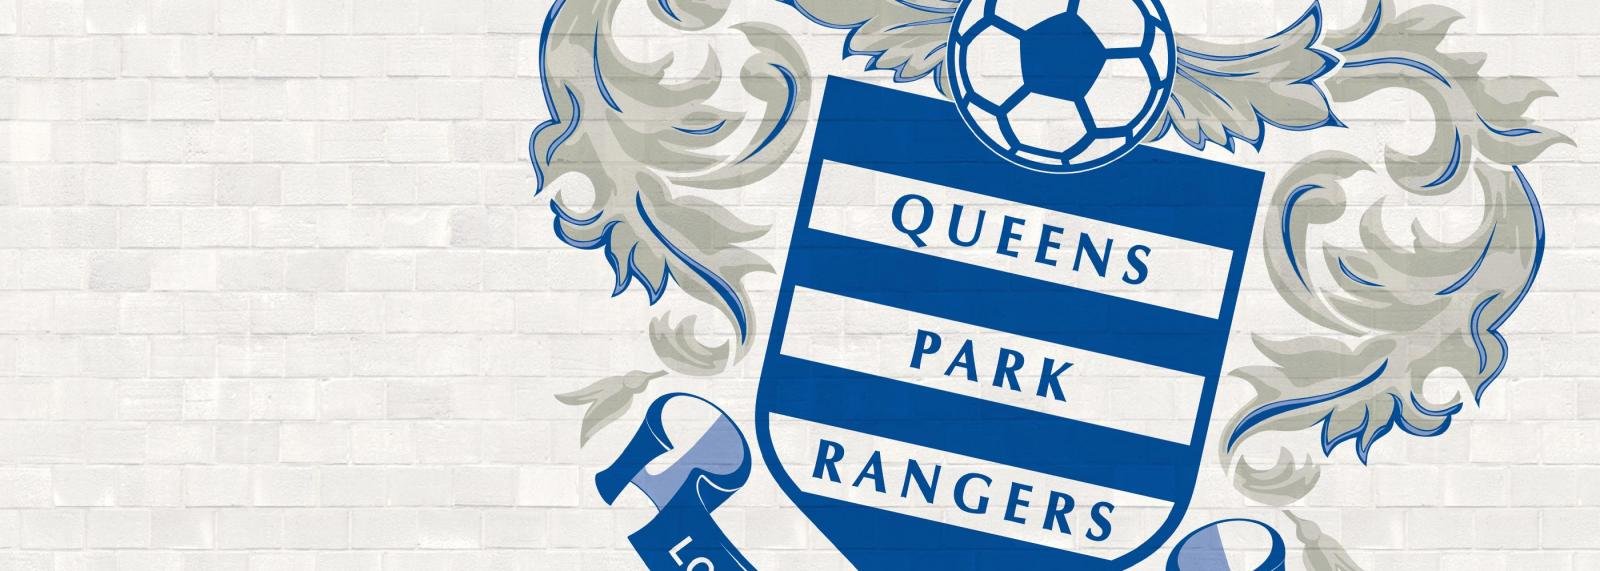 Forget about a late play-off push, Hasselbaink should continue stabilising QPR for next season